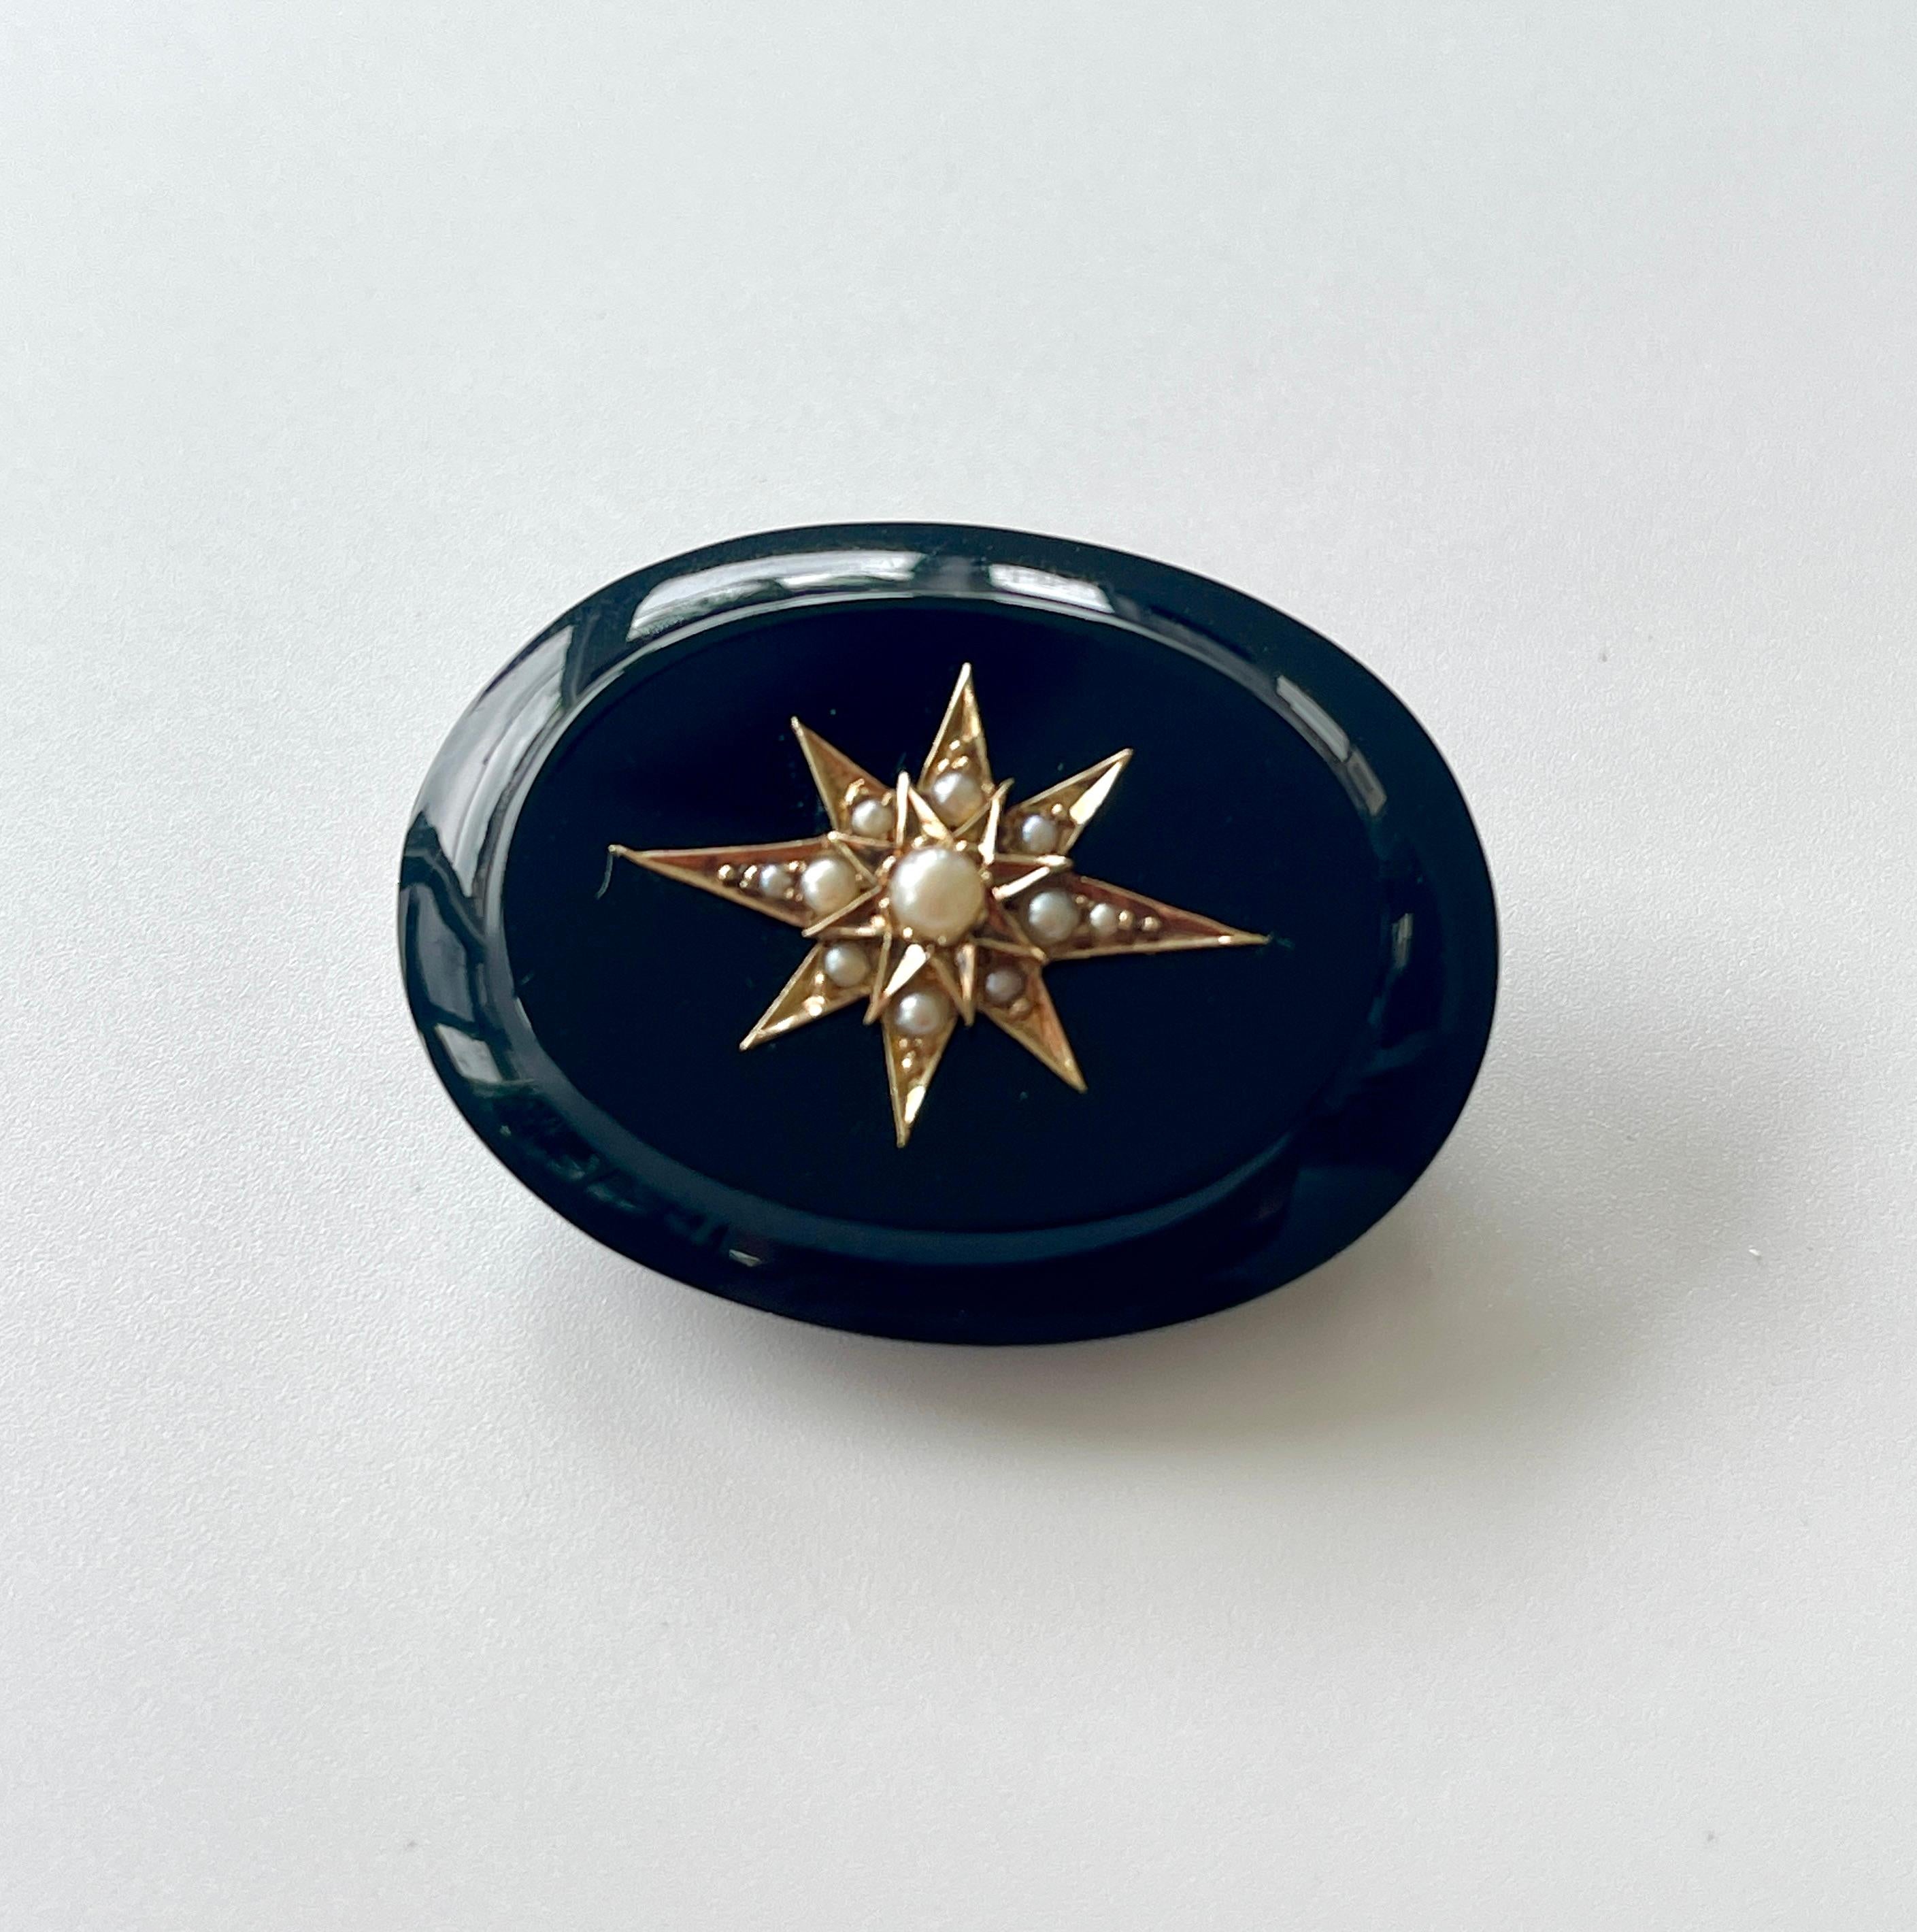 Presenting this exquisite, antique natural Onyx and Pearl mourning brooch.
From the Georgian to the Victorian eras, mourning jewellery was a treasured way to remember the passing of a loved one.  Queen Victoria herself, made them even more popular